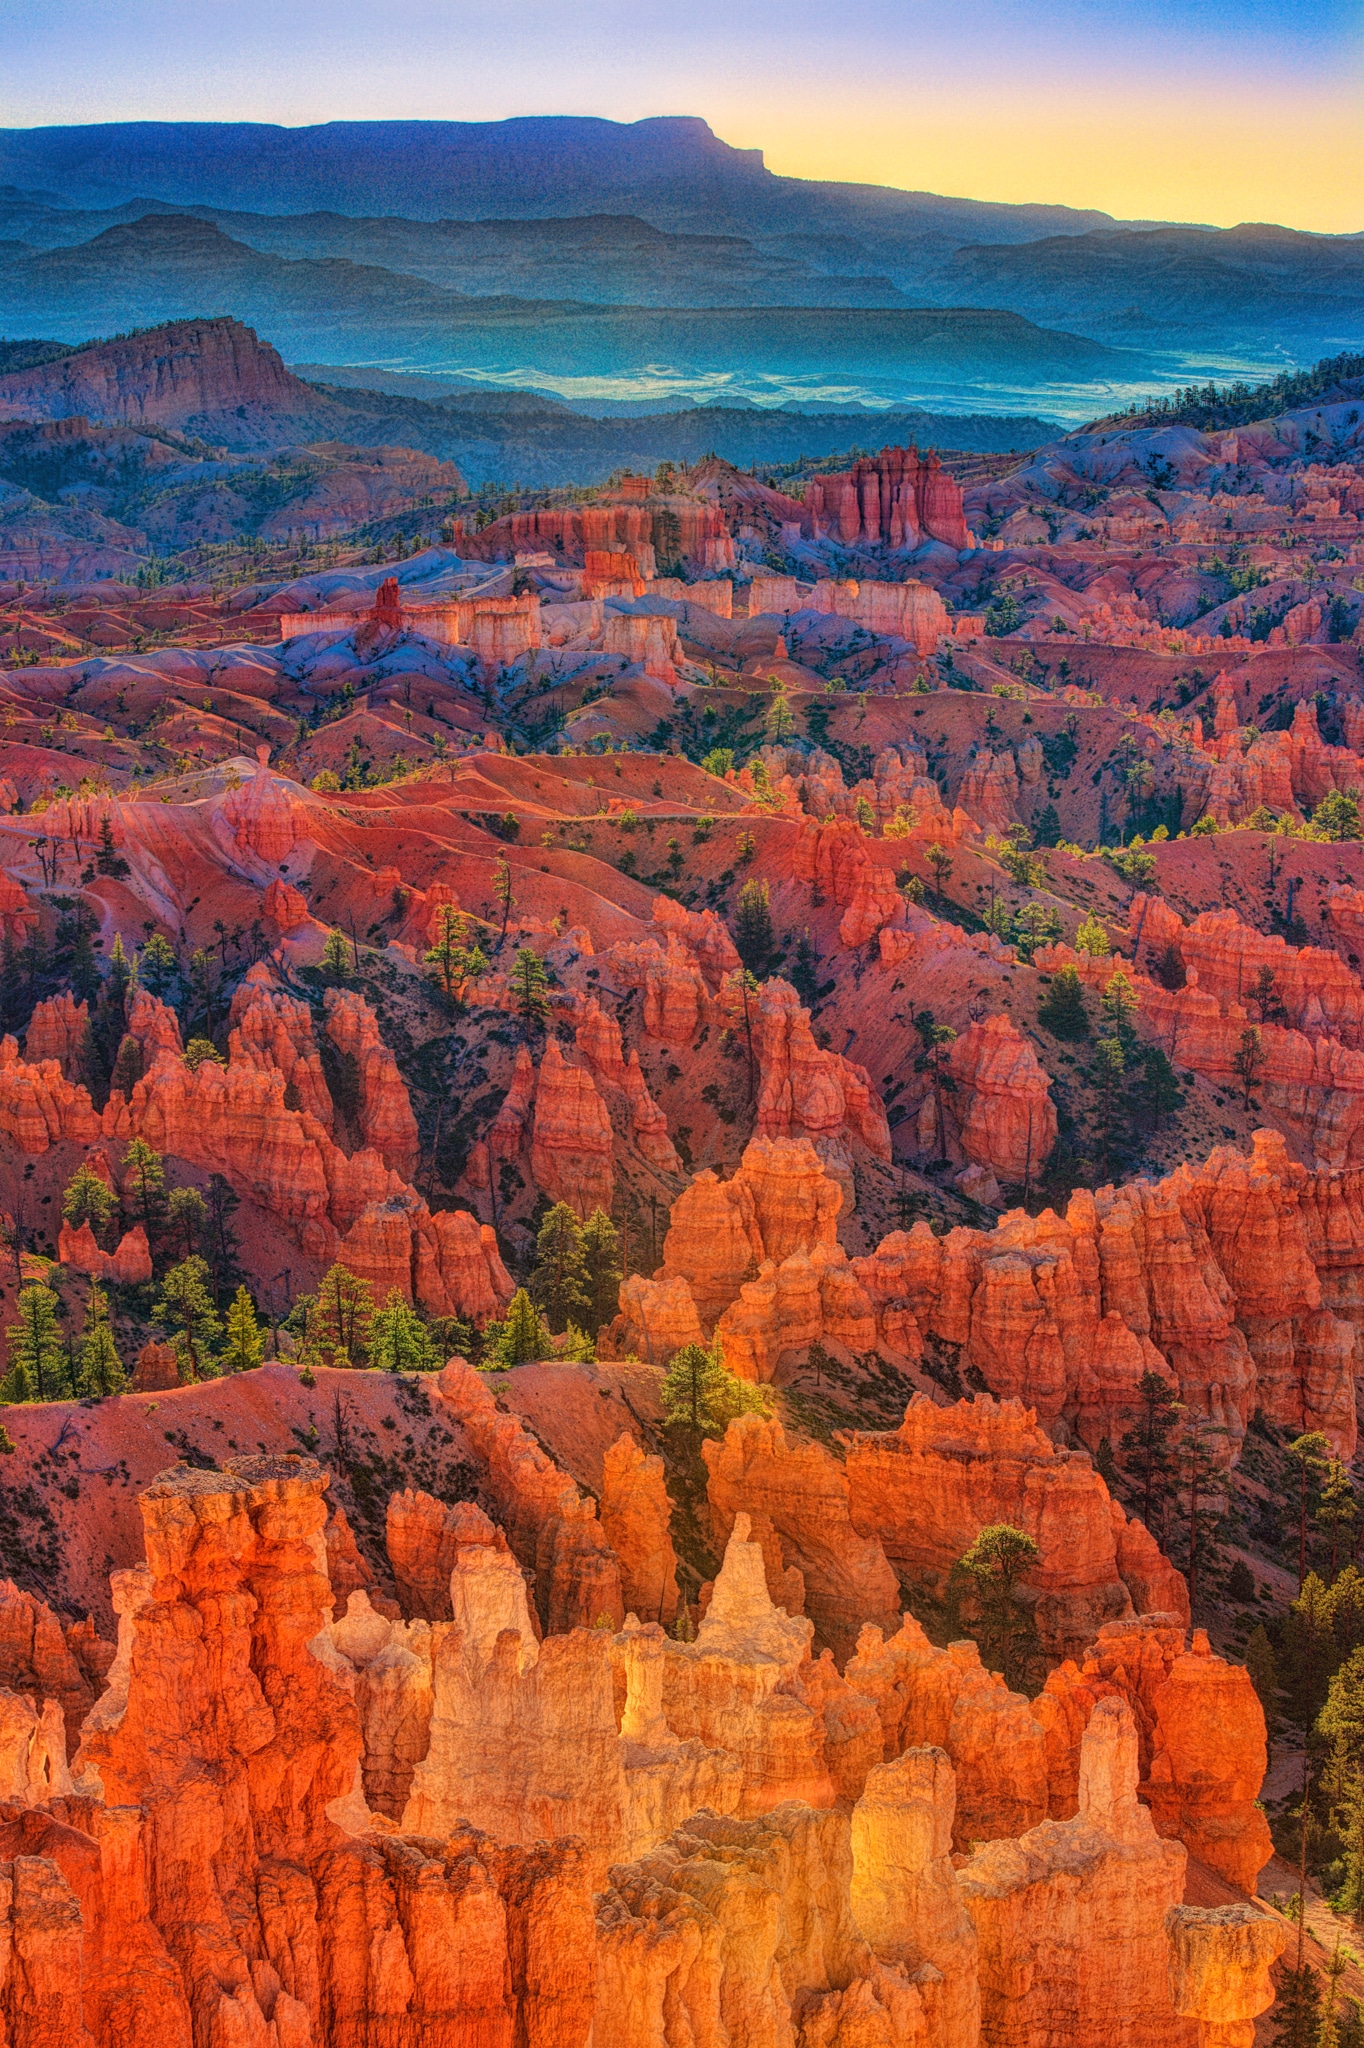 Sunrise view from Fairlyland Point in Bryce Canyon National Park, Utah. This photo is part of the Garden Variety Photo Exhibition